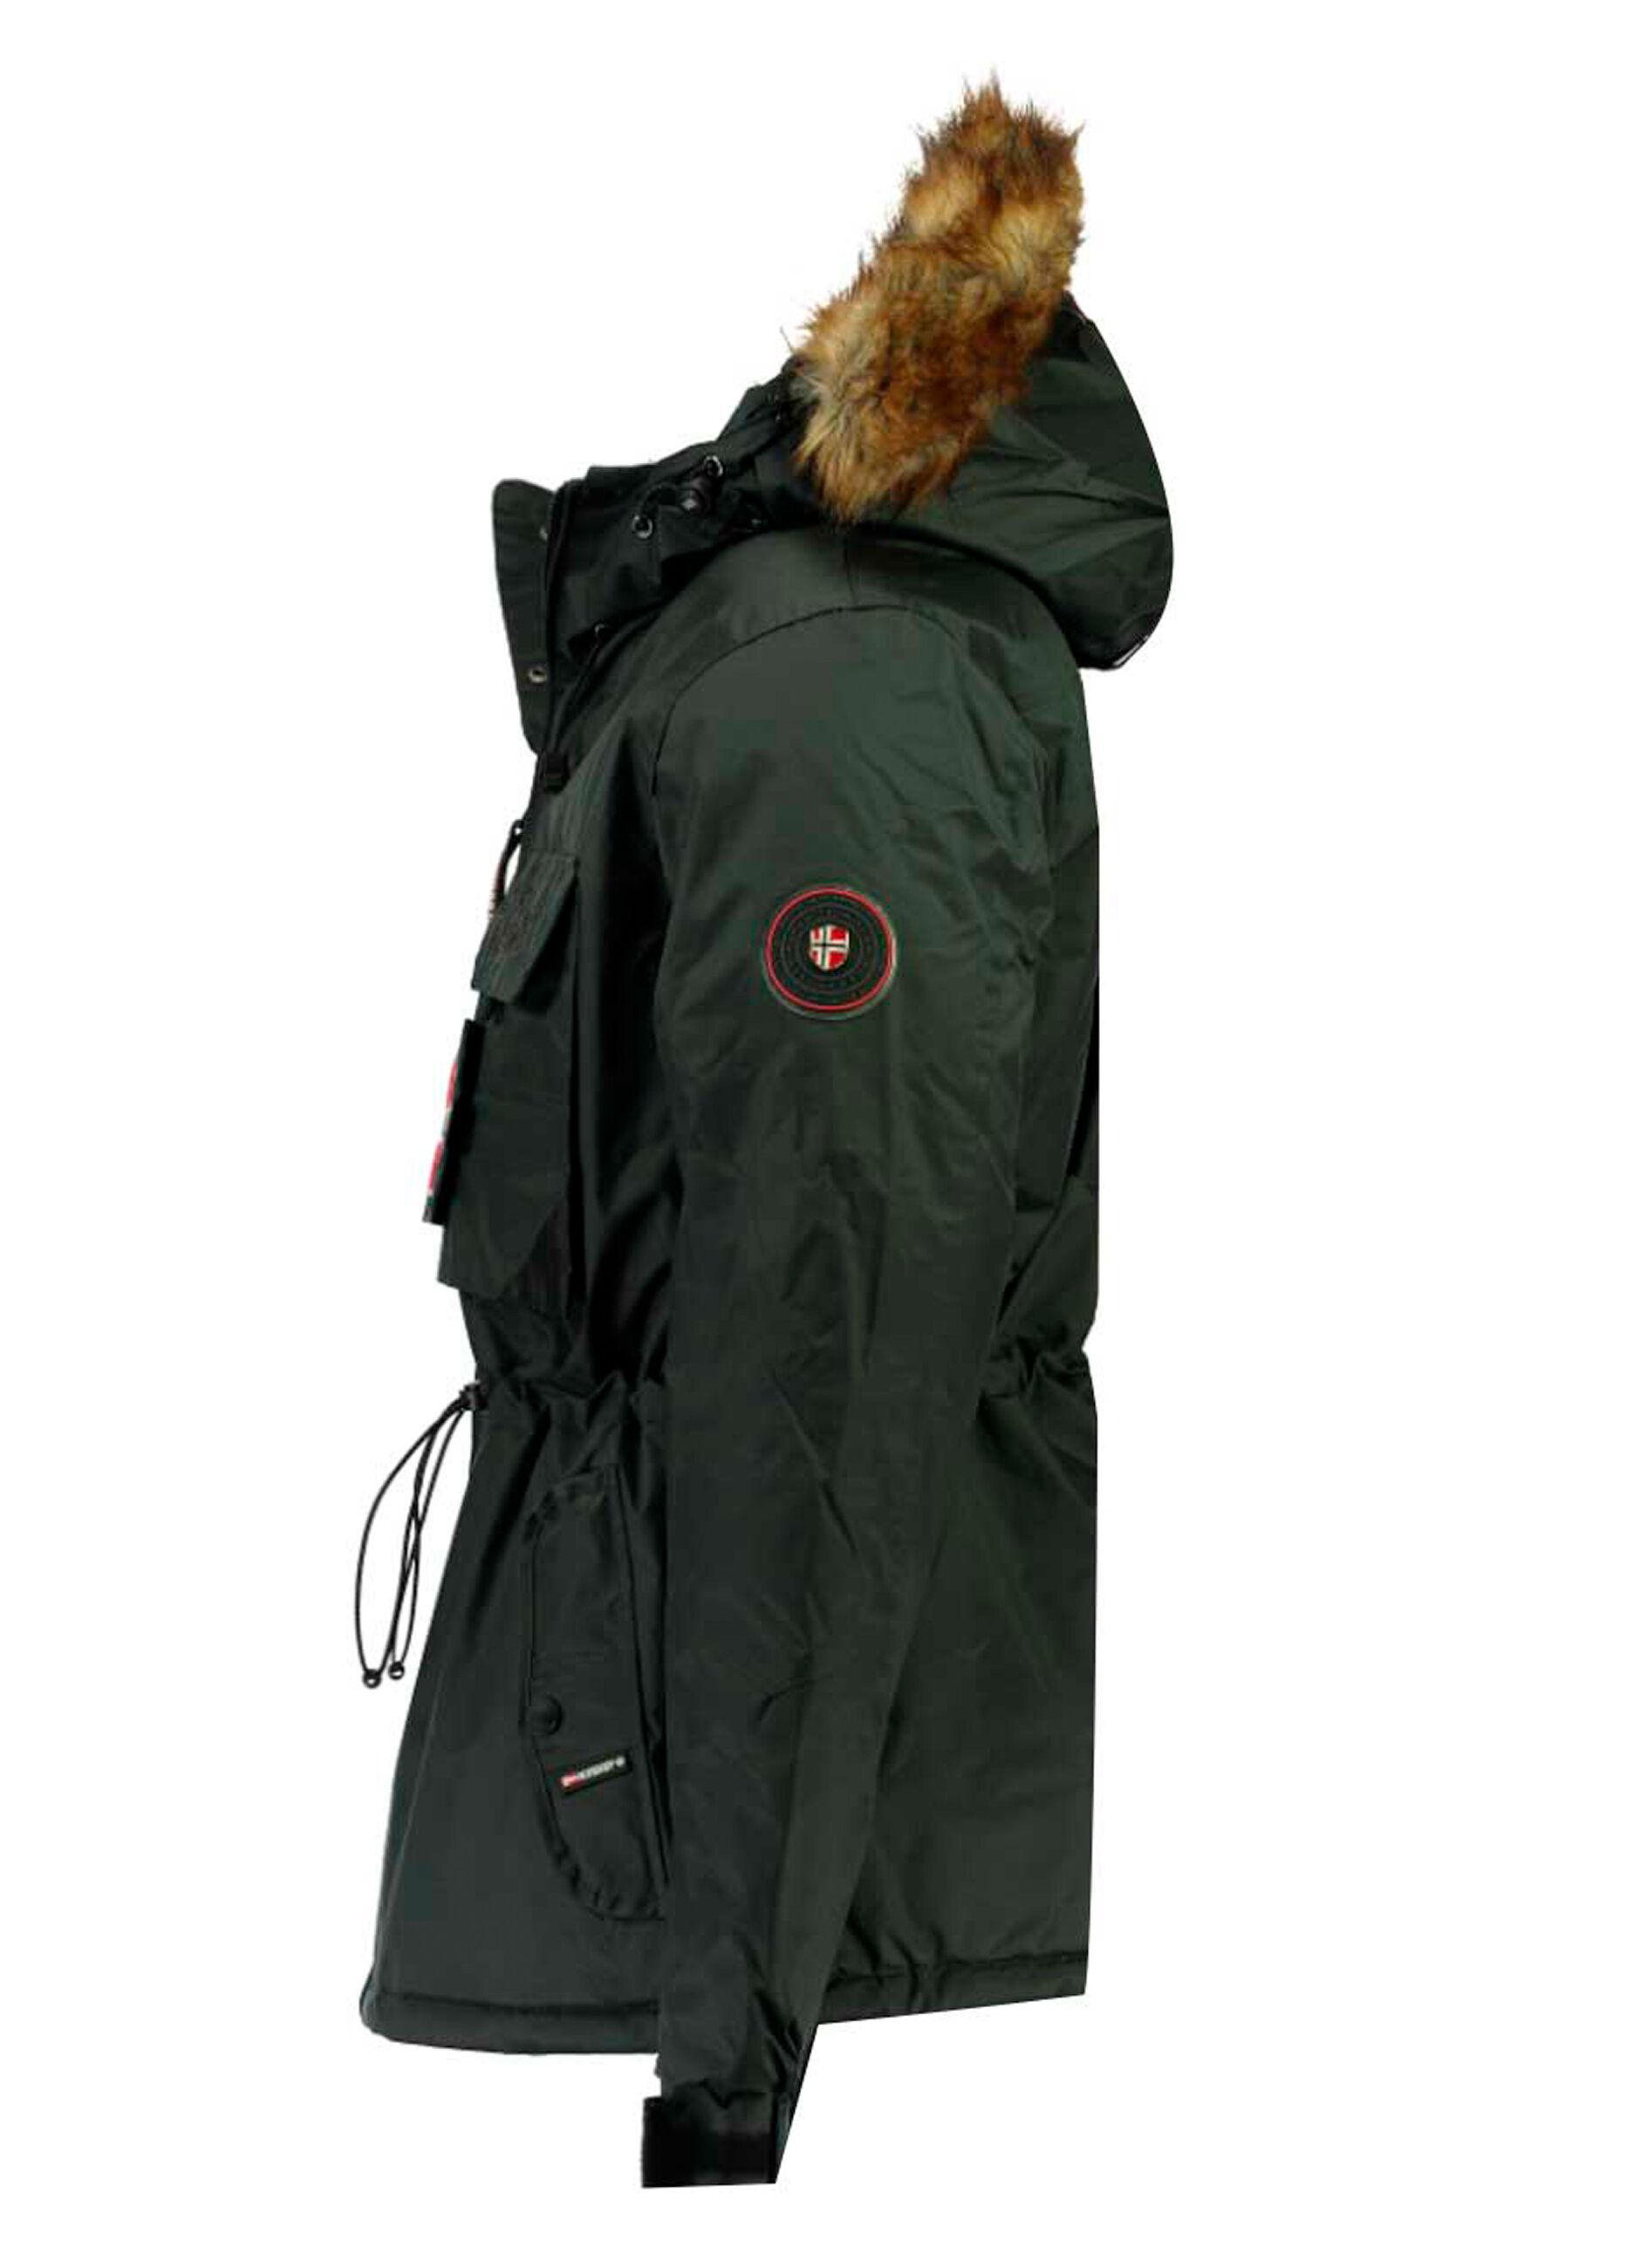 Geographical Norway full-zip parka